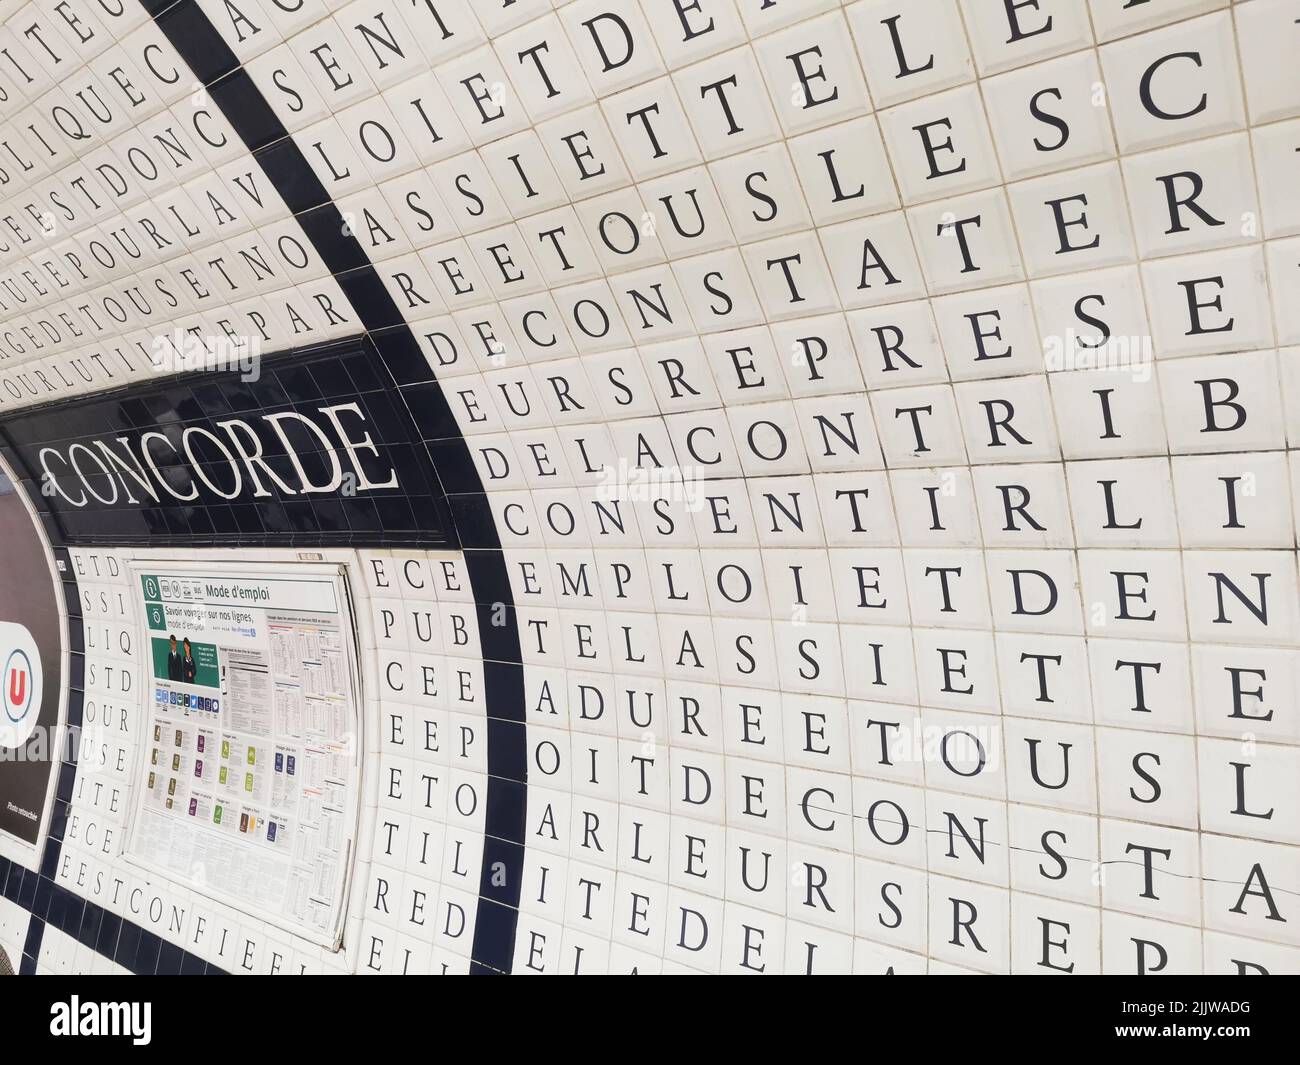 picture of the typical Look of a Metro Station in Paris Underground (unser the Place de la Concorde) and its mosaics with numerous letters Stock Photo